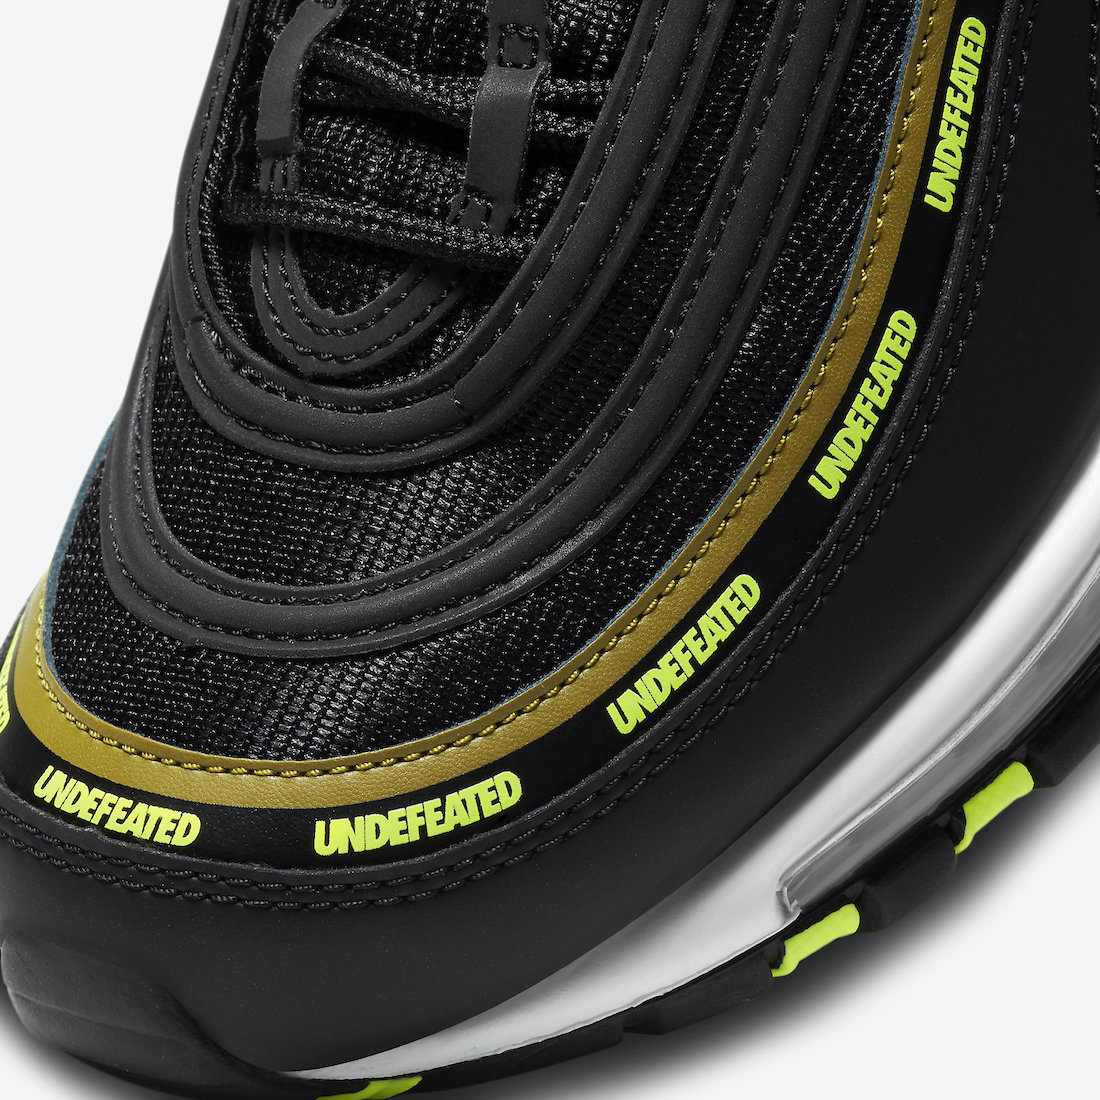 Undefeated Nike Air Max 97 Black Volt DC4830 001 Release Date 6